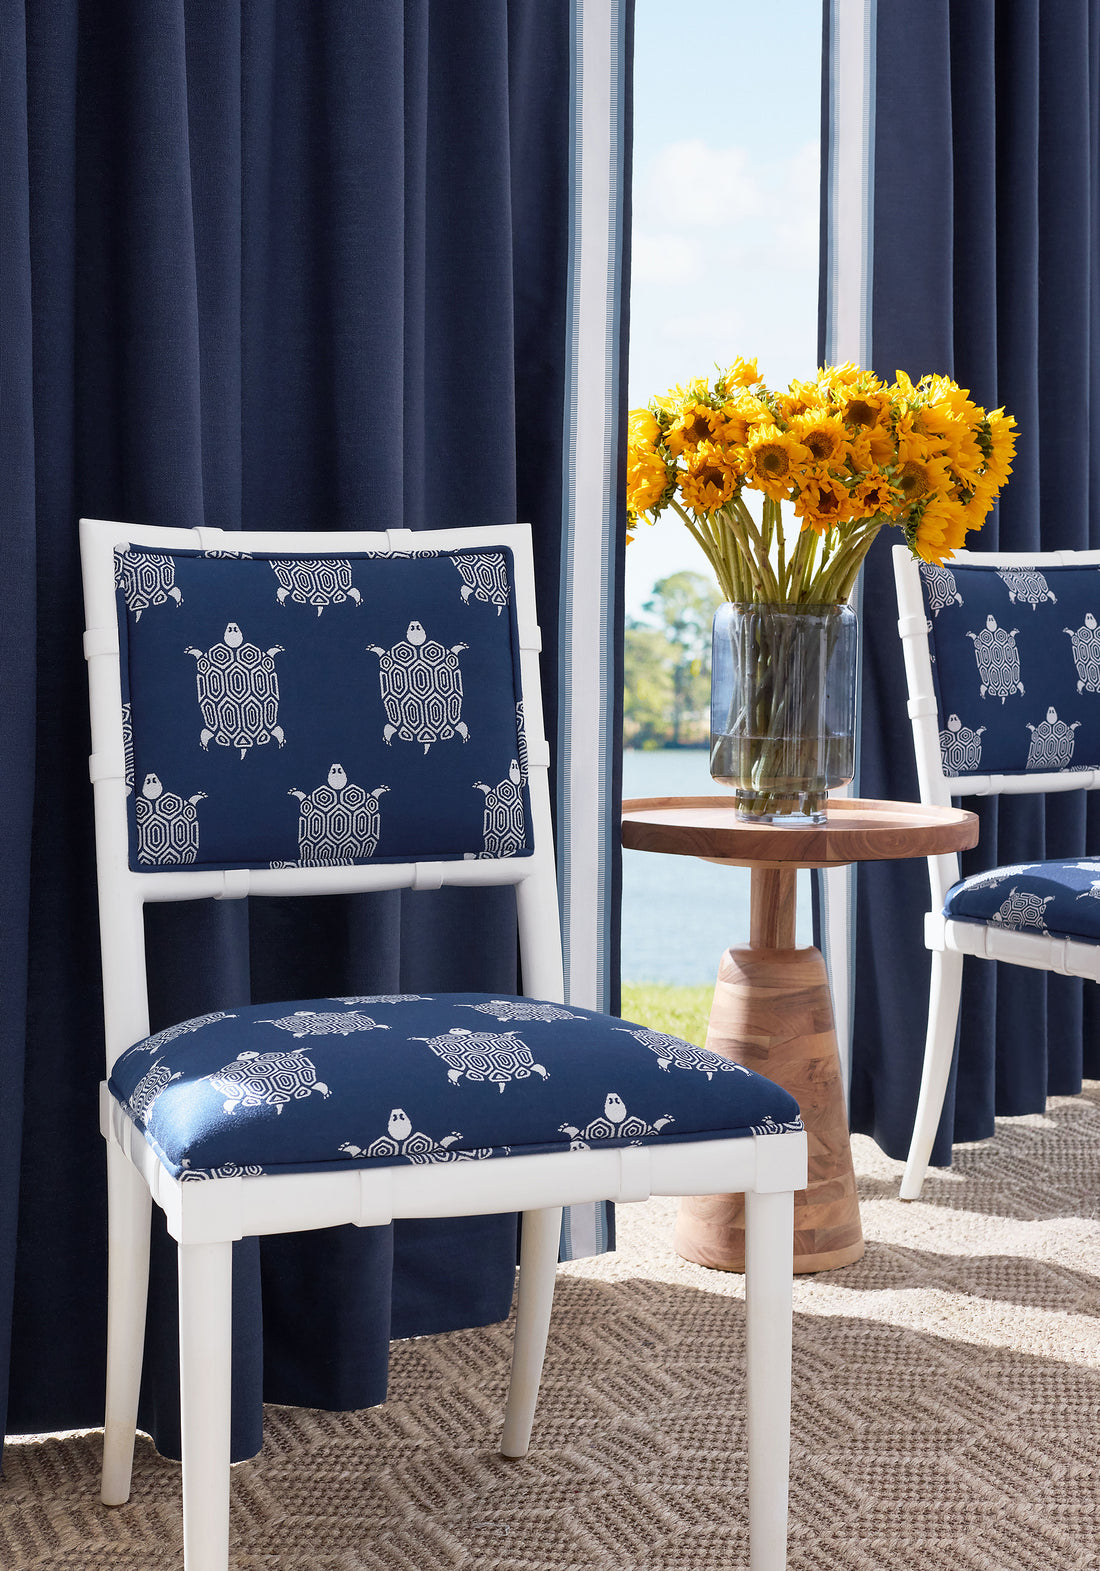 Greenwich Dining Chairs in Turtle Bay fabric in navy color - pattern number W81629 - by Thibaut fabrics